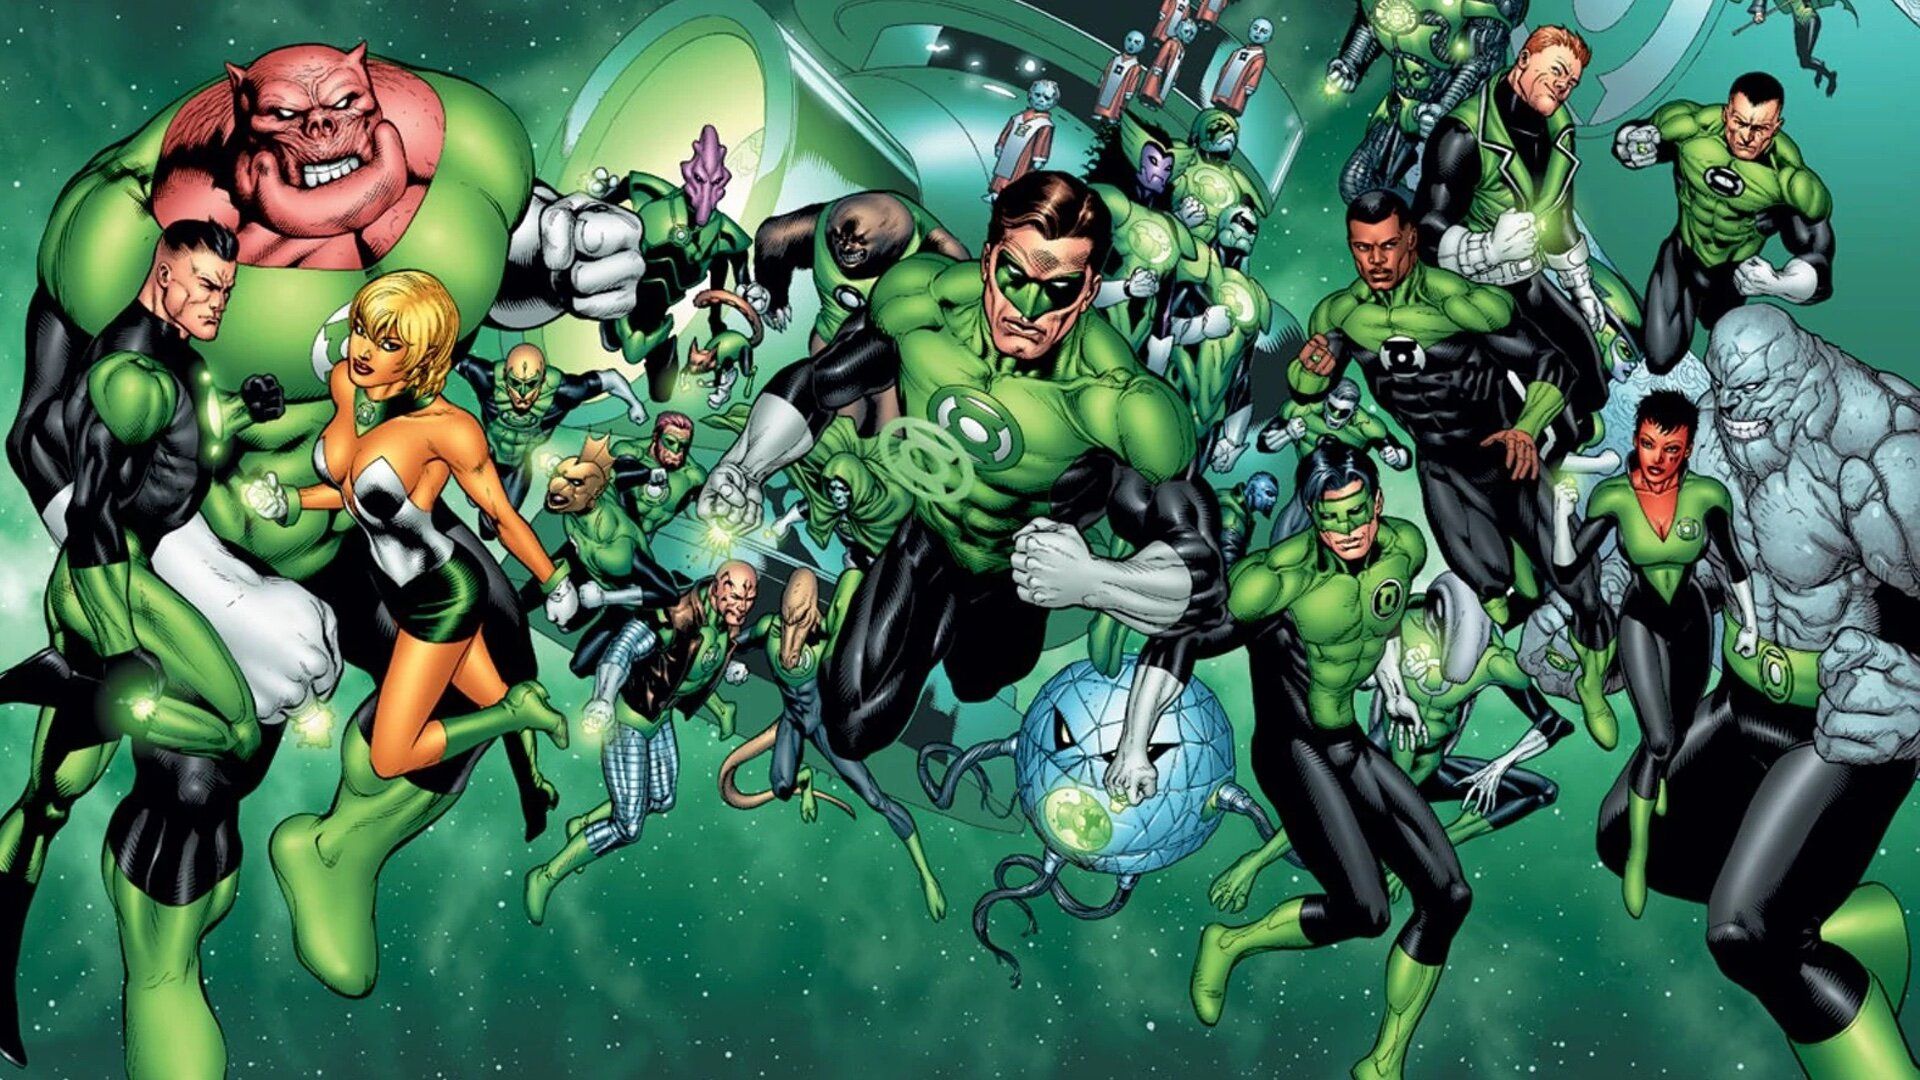 Geoff Johns GREEN LANTERN CORPS Movie Script Will Be Completed Soon and Presented To J.J. Abrams